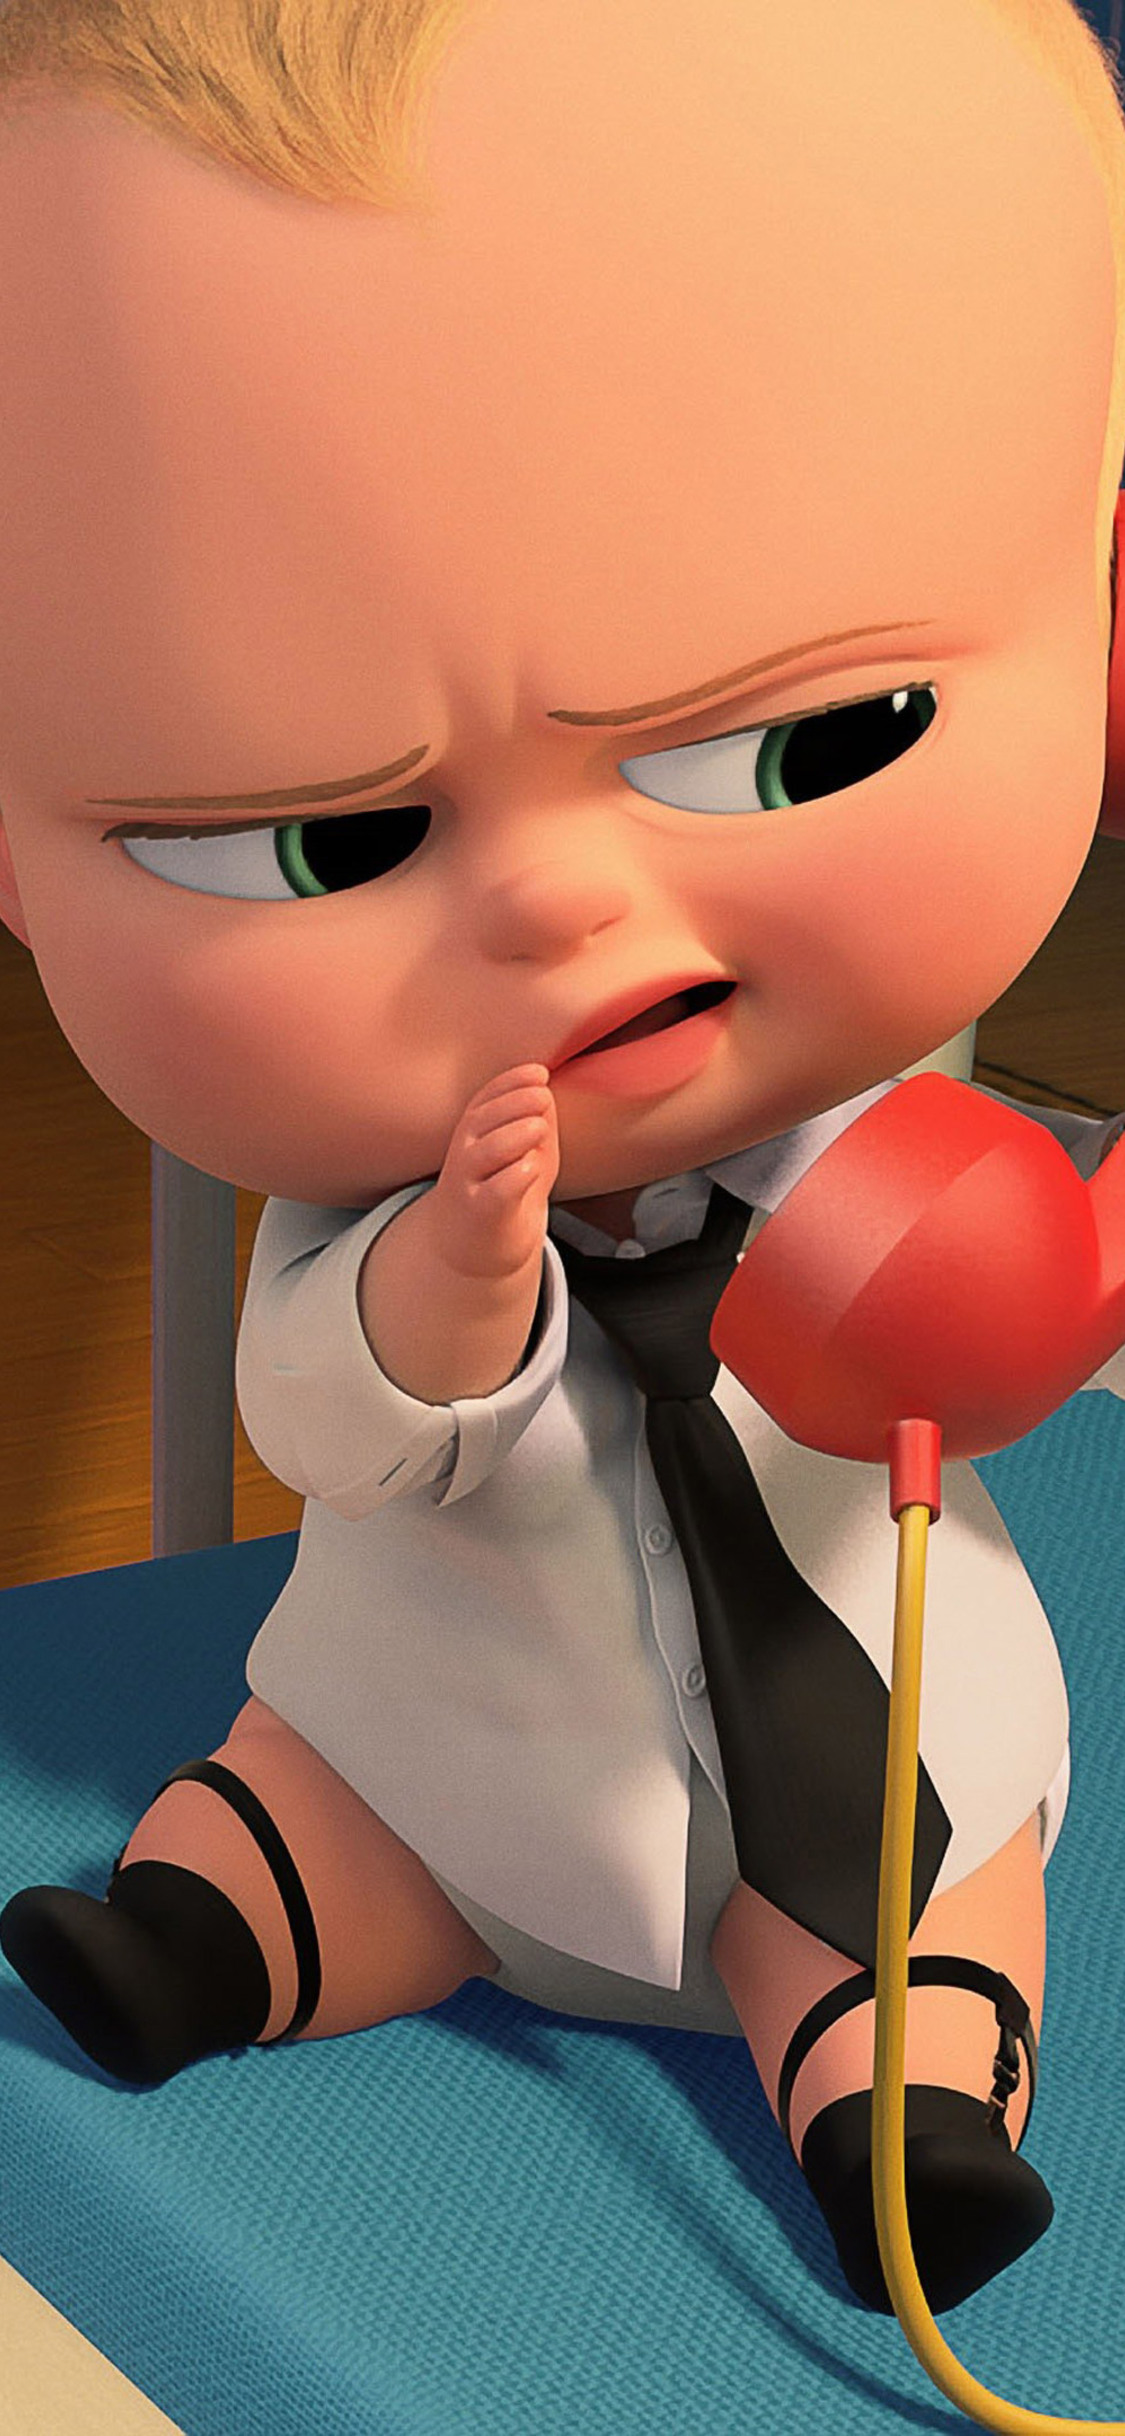 The Boss Baby Wallpapers